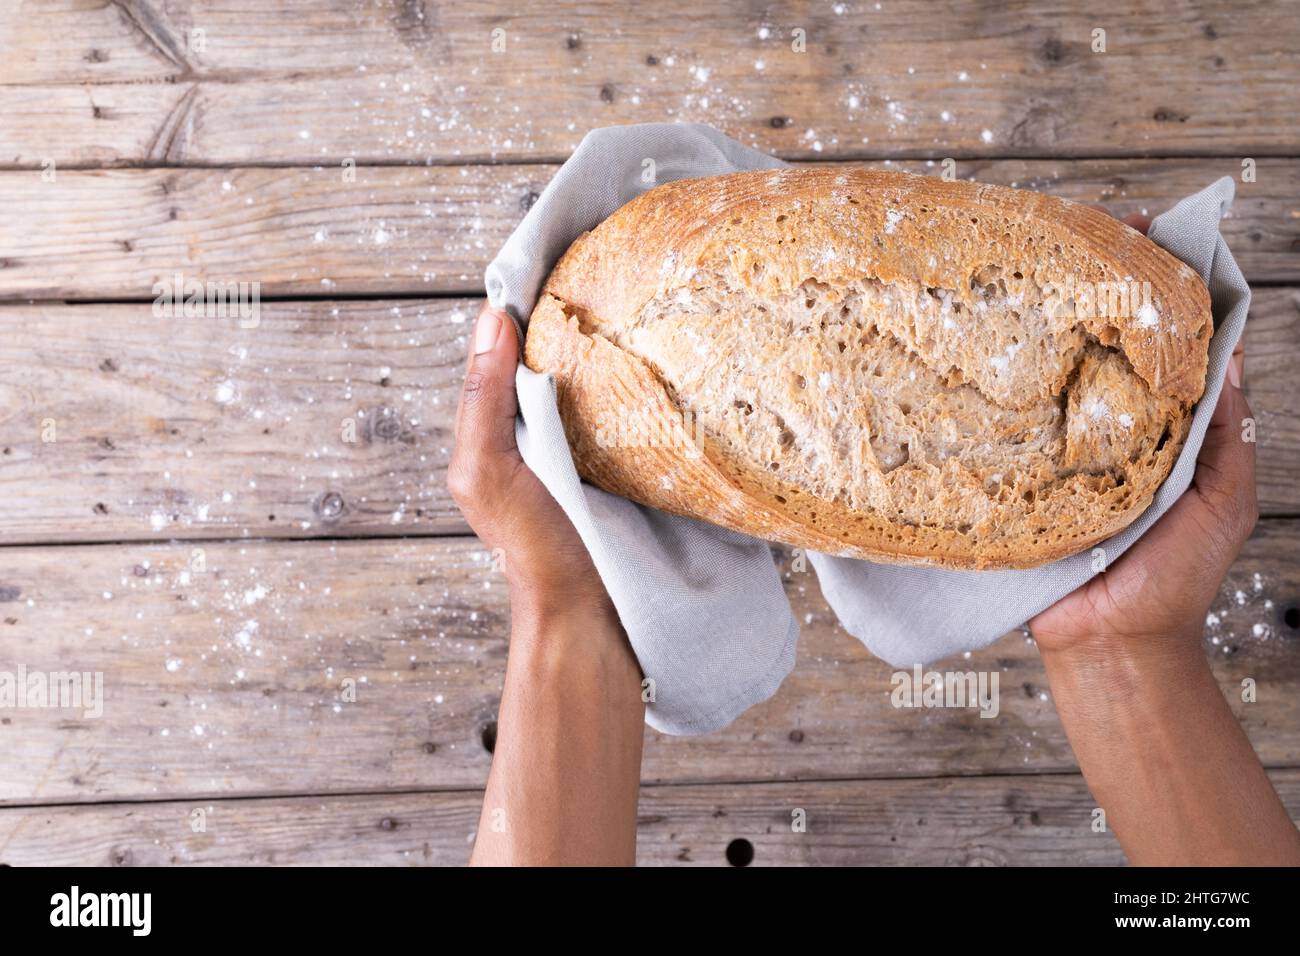 Overhead view of cropped african american male hands holding baked bread loaf over table Stock Photo